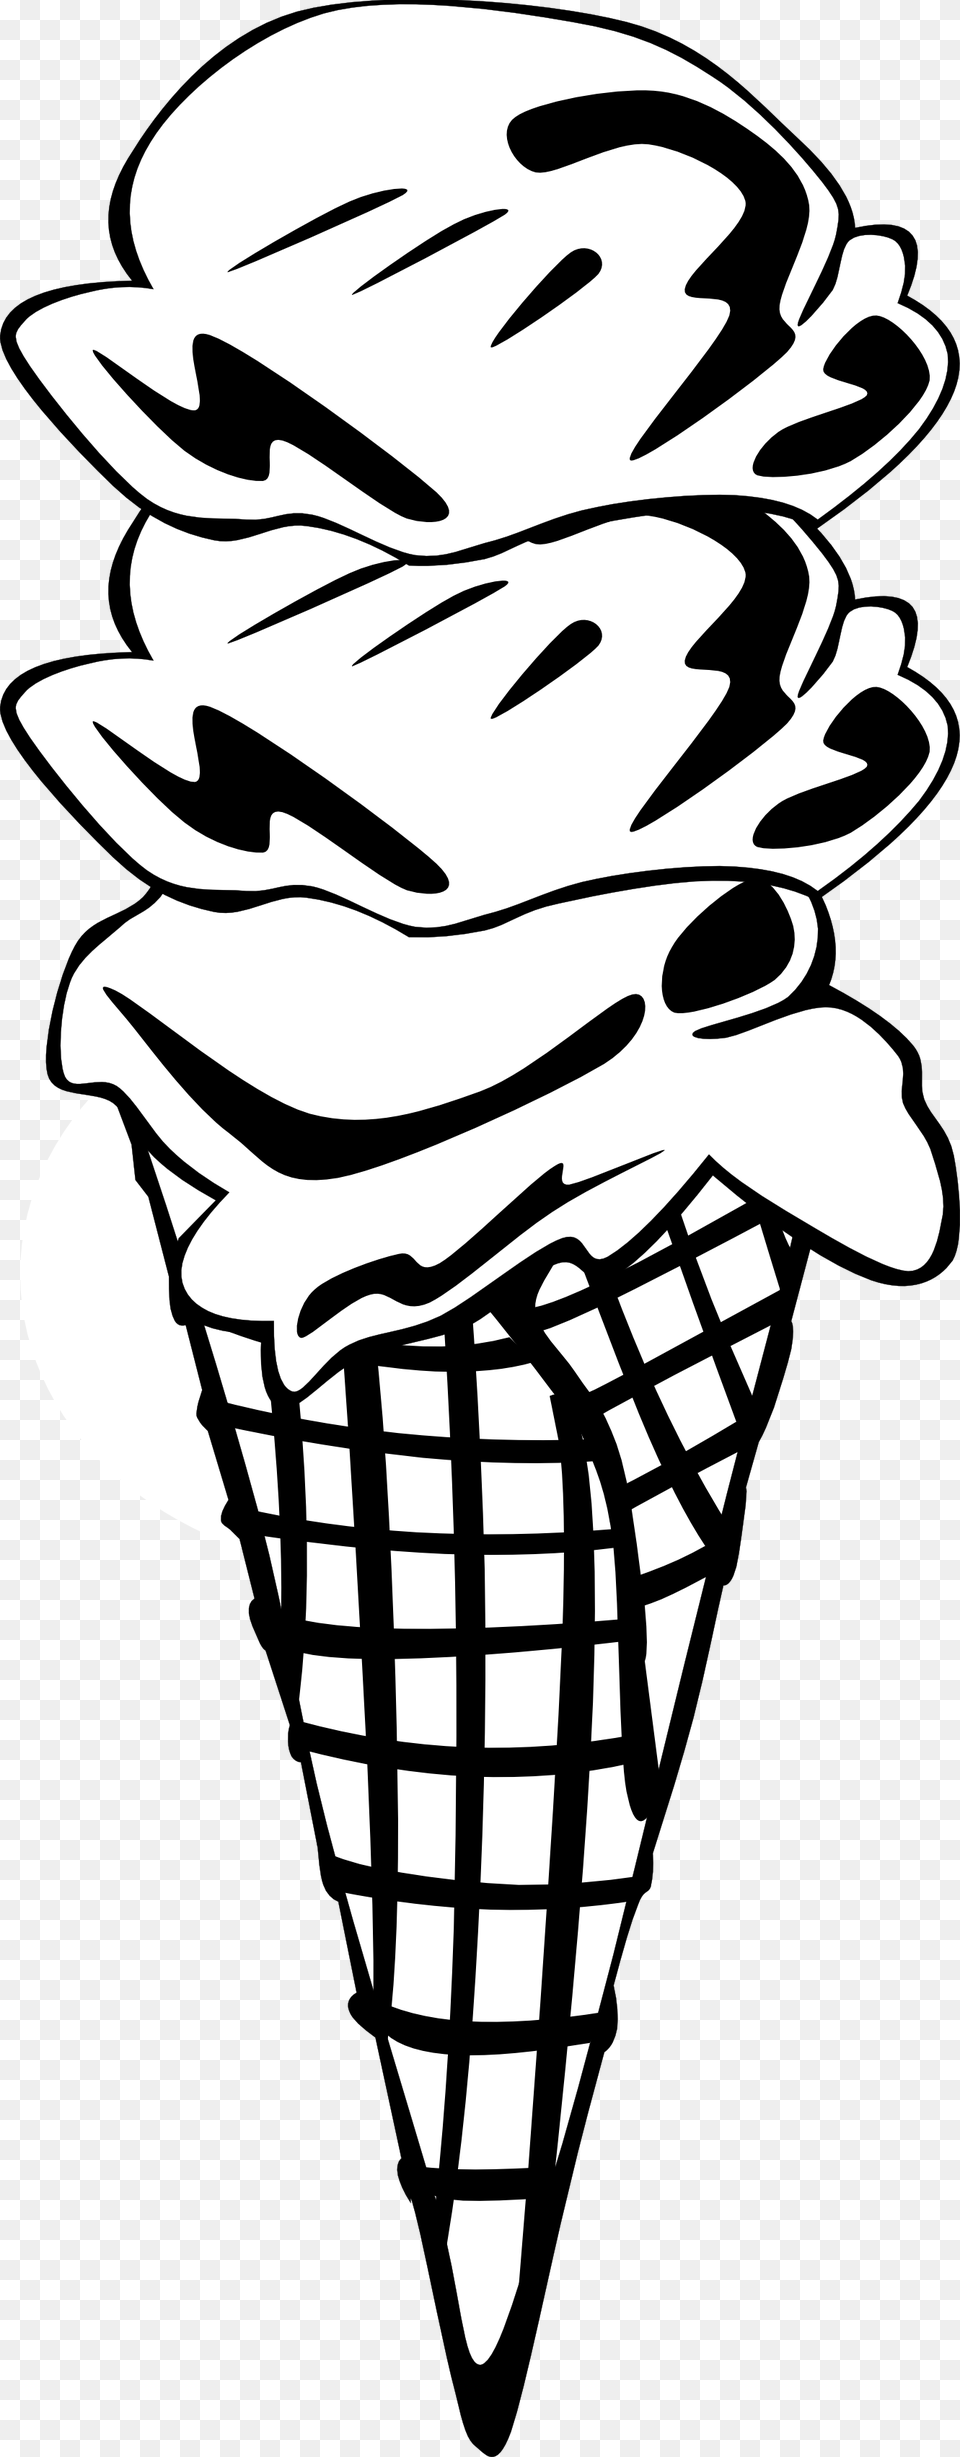 Ice Cream Line Drawing At Getdrawings Ice Cream Cone Clip Art, Dessert, Food, Ice Cream, Stencil Free Transparent Png